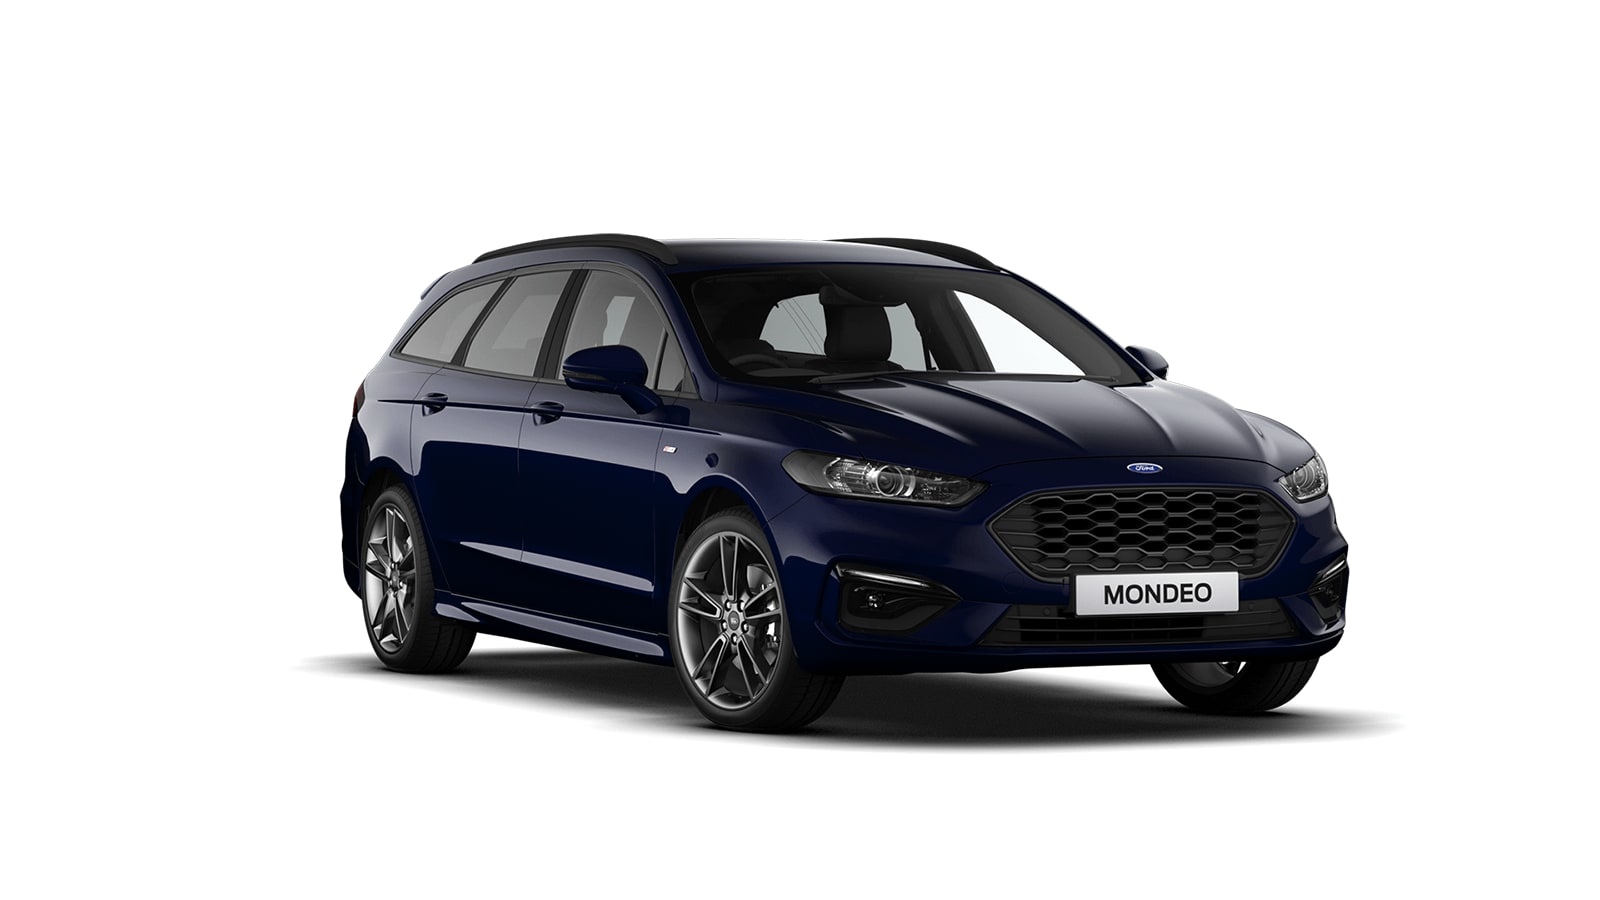 Ford Mondeo ST-Line Edition 2.0L EcoBlue 190PS at Maxwell Motors